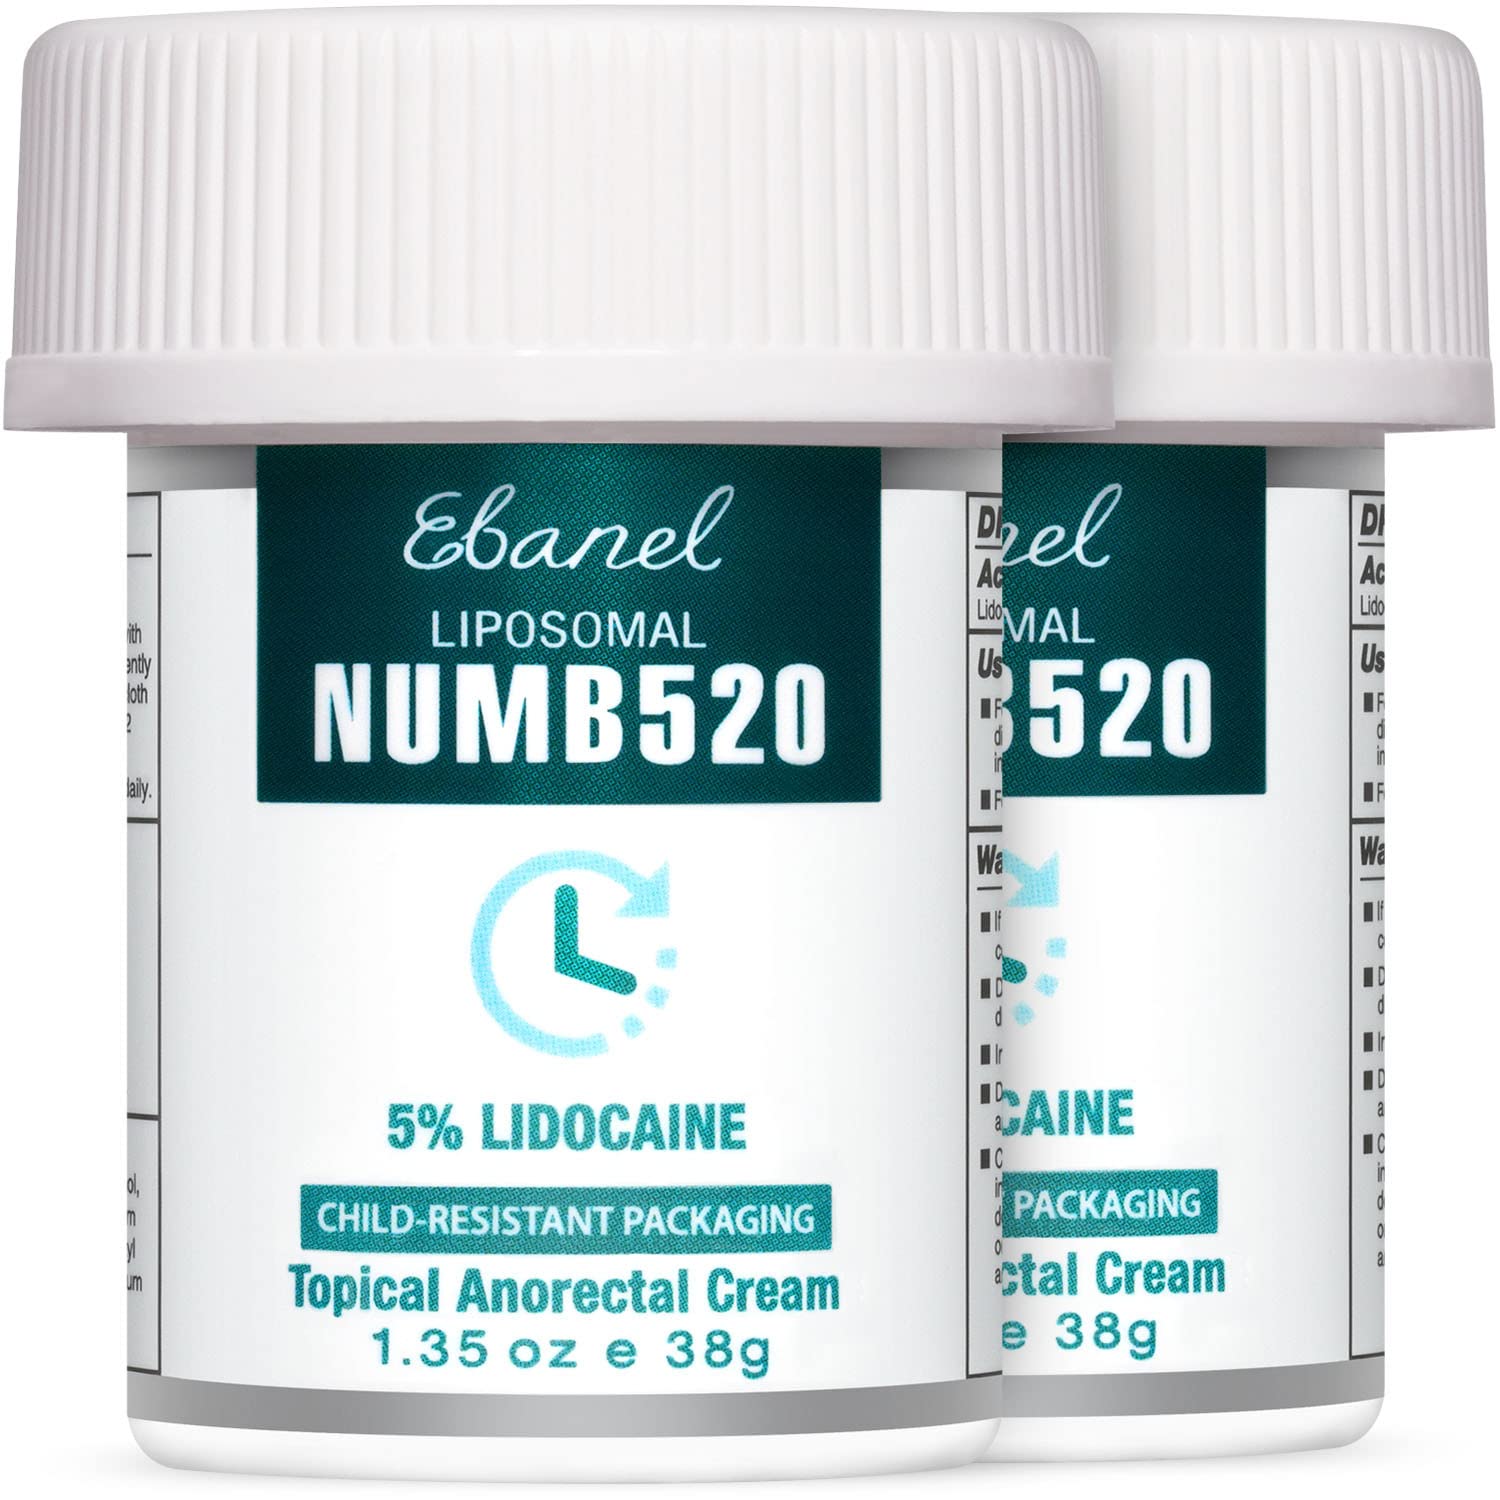 Ebanel 5% Lidocaine Numbing Cream Maximum Strength Liposomal Numb520 Topical Anesthetic Pain Relief Cream 2Pack of 1.35 Oz with Aloe Vera, Vitamin E for Local and Anorectal Uses, Hemorrhoid Treatment